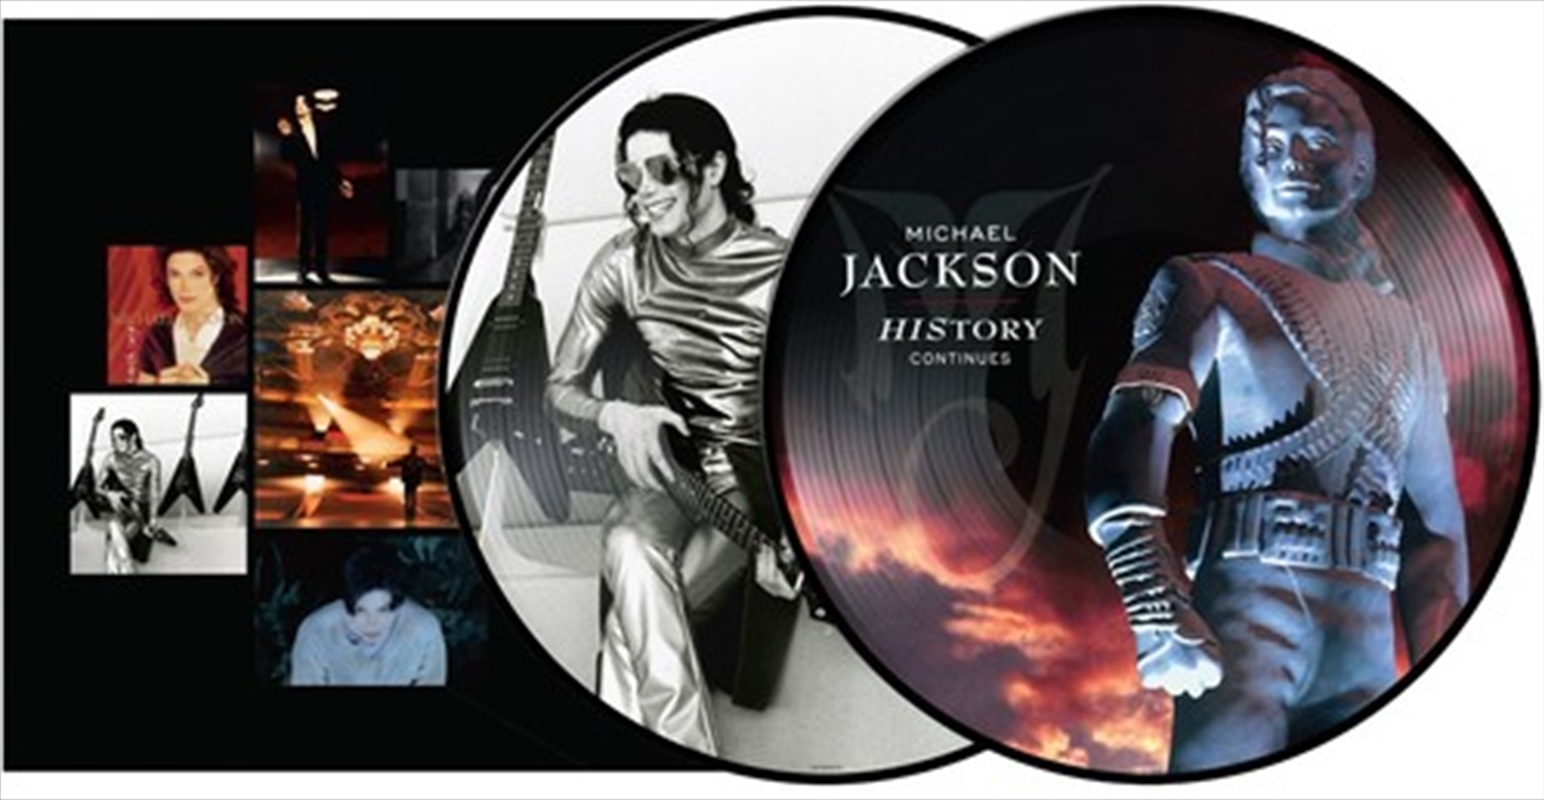 HIStory: Continues Limited Edition Picture Vinyl/Product Detail/Pop